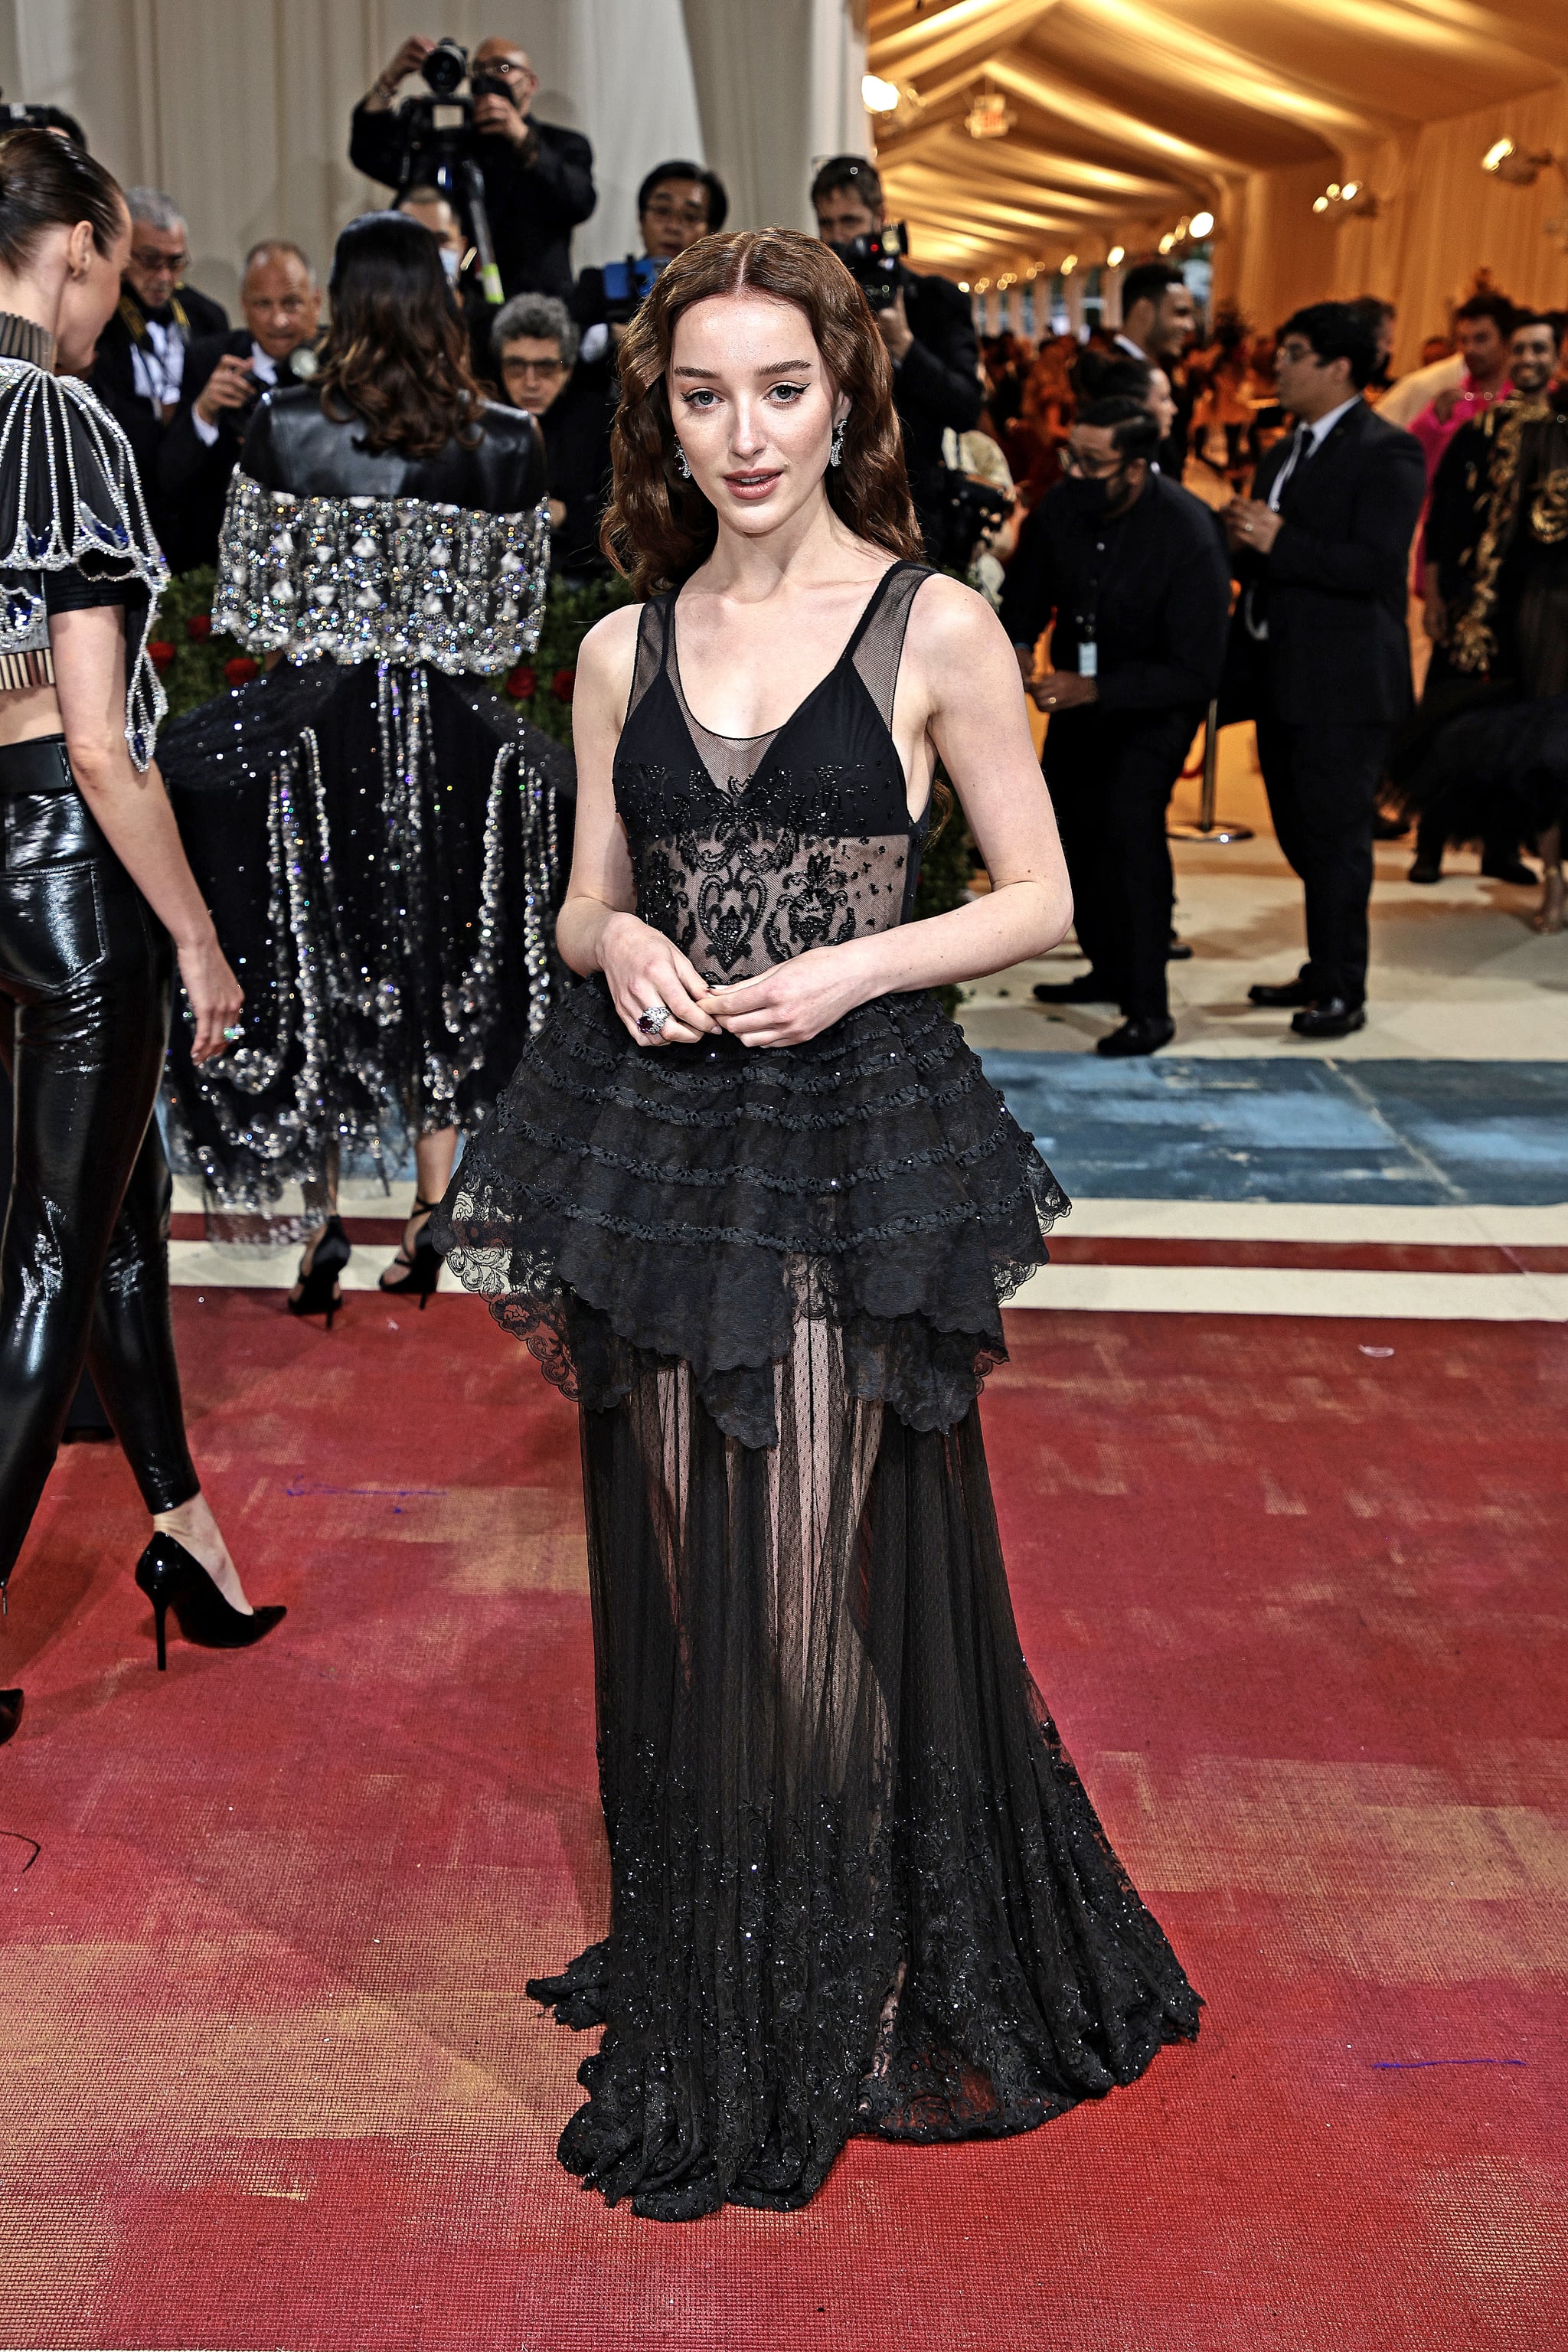 Phoebe Dynevor in Louis Vuitton at the 2022 Met Gala